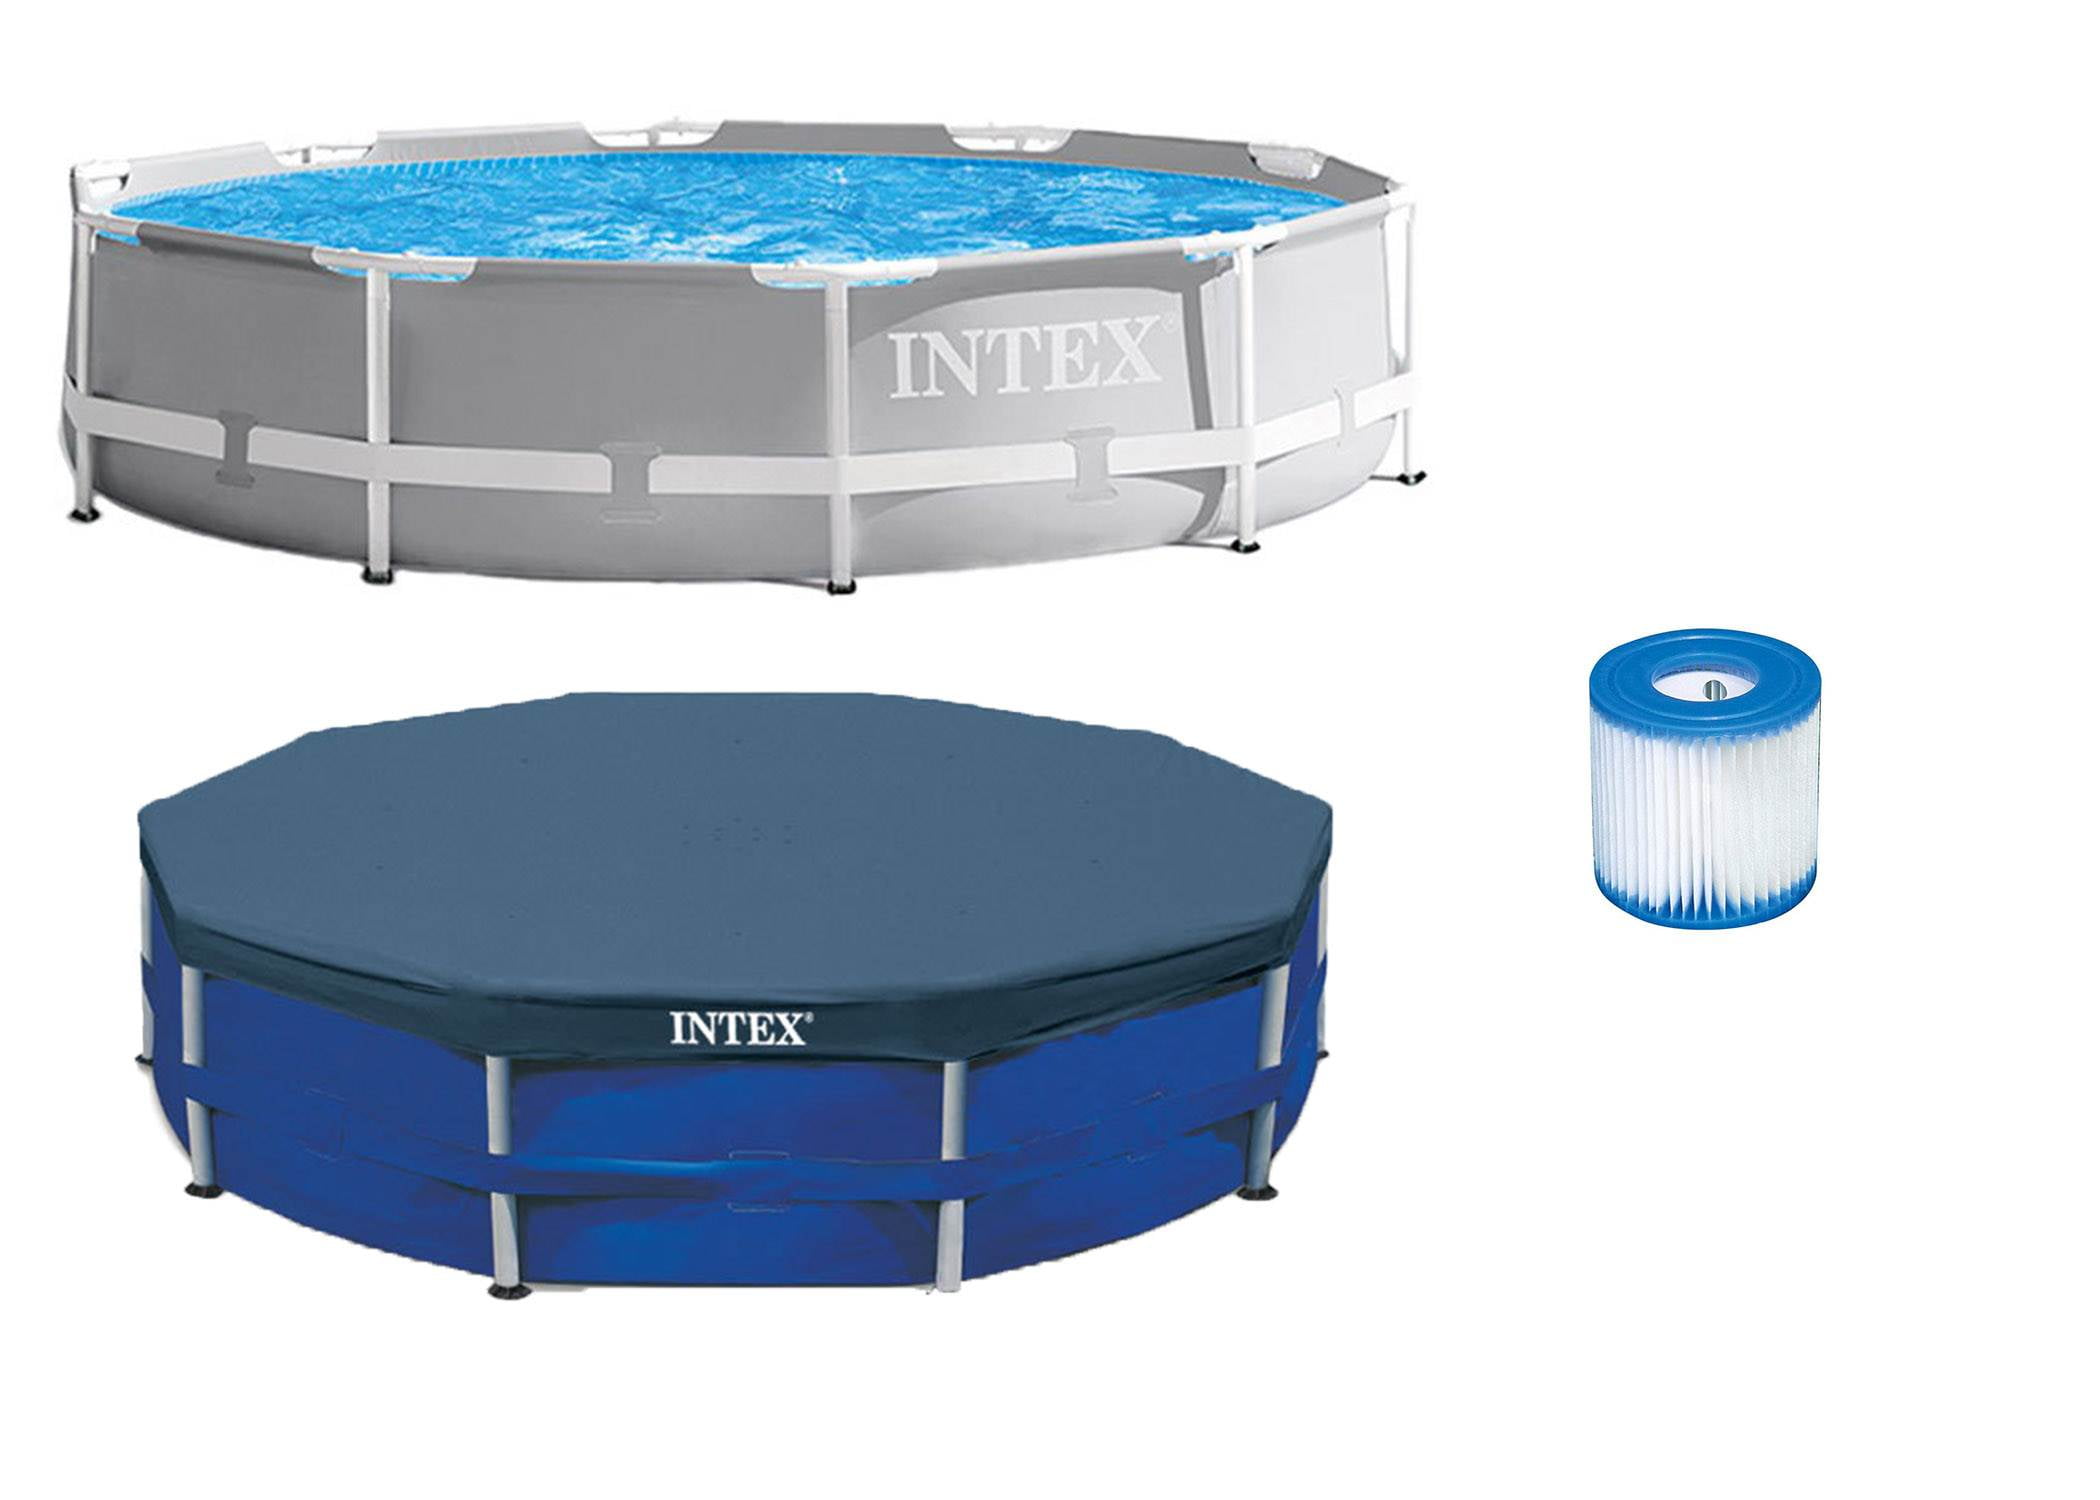 Intex 10ft x 10ft x 30in w/ Foot Round Pool Cover and Filter Cartridge Walmart.com